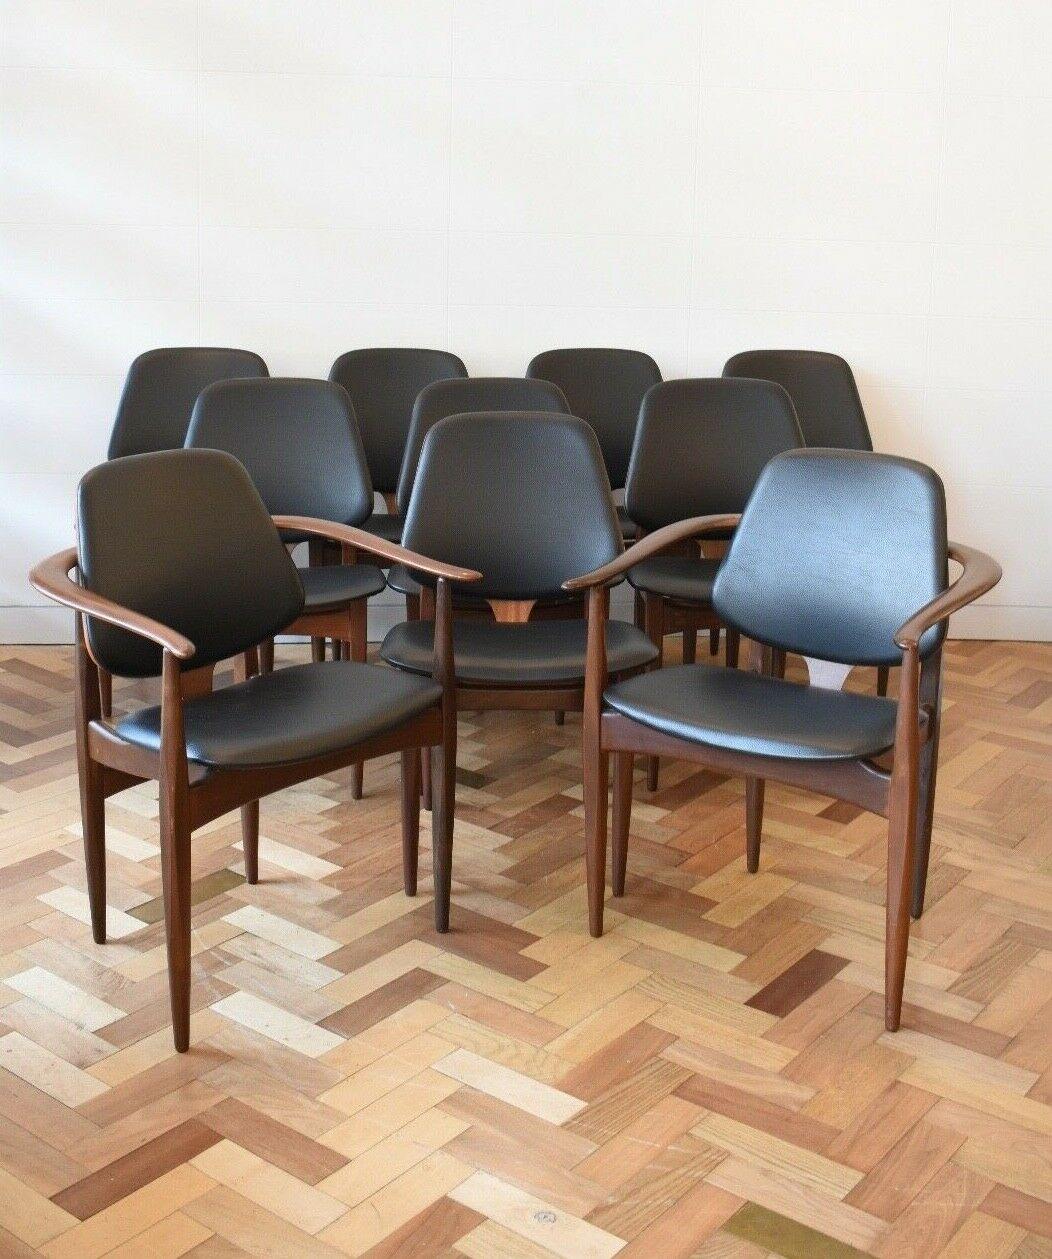 Set of ten gorgeous dining chairs made by English maker Elliots of Newbury in the 1960s. These elegant teak chairs feature a sculpted back with recently upholstered black vinyl cushions whilst the sets rarity is increased greatly by the two